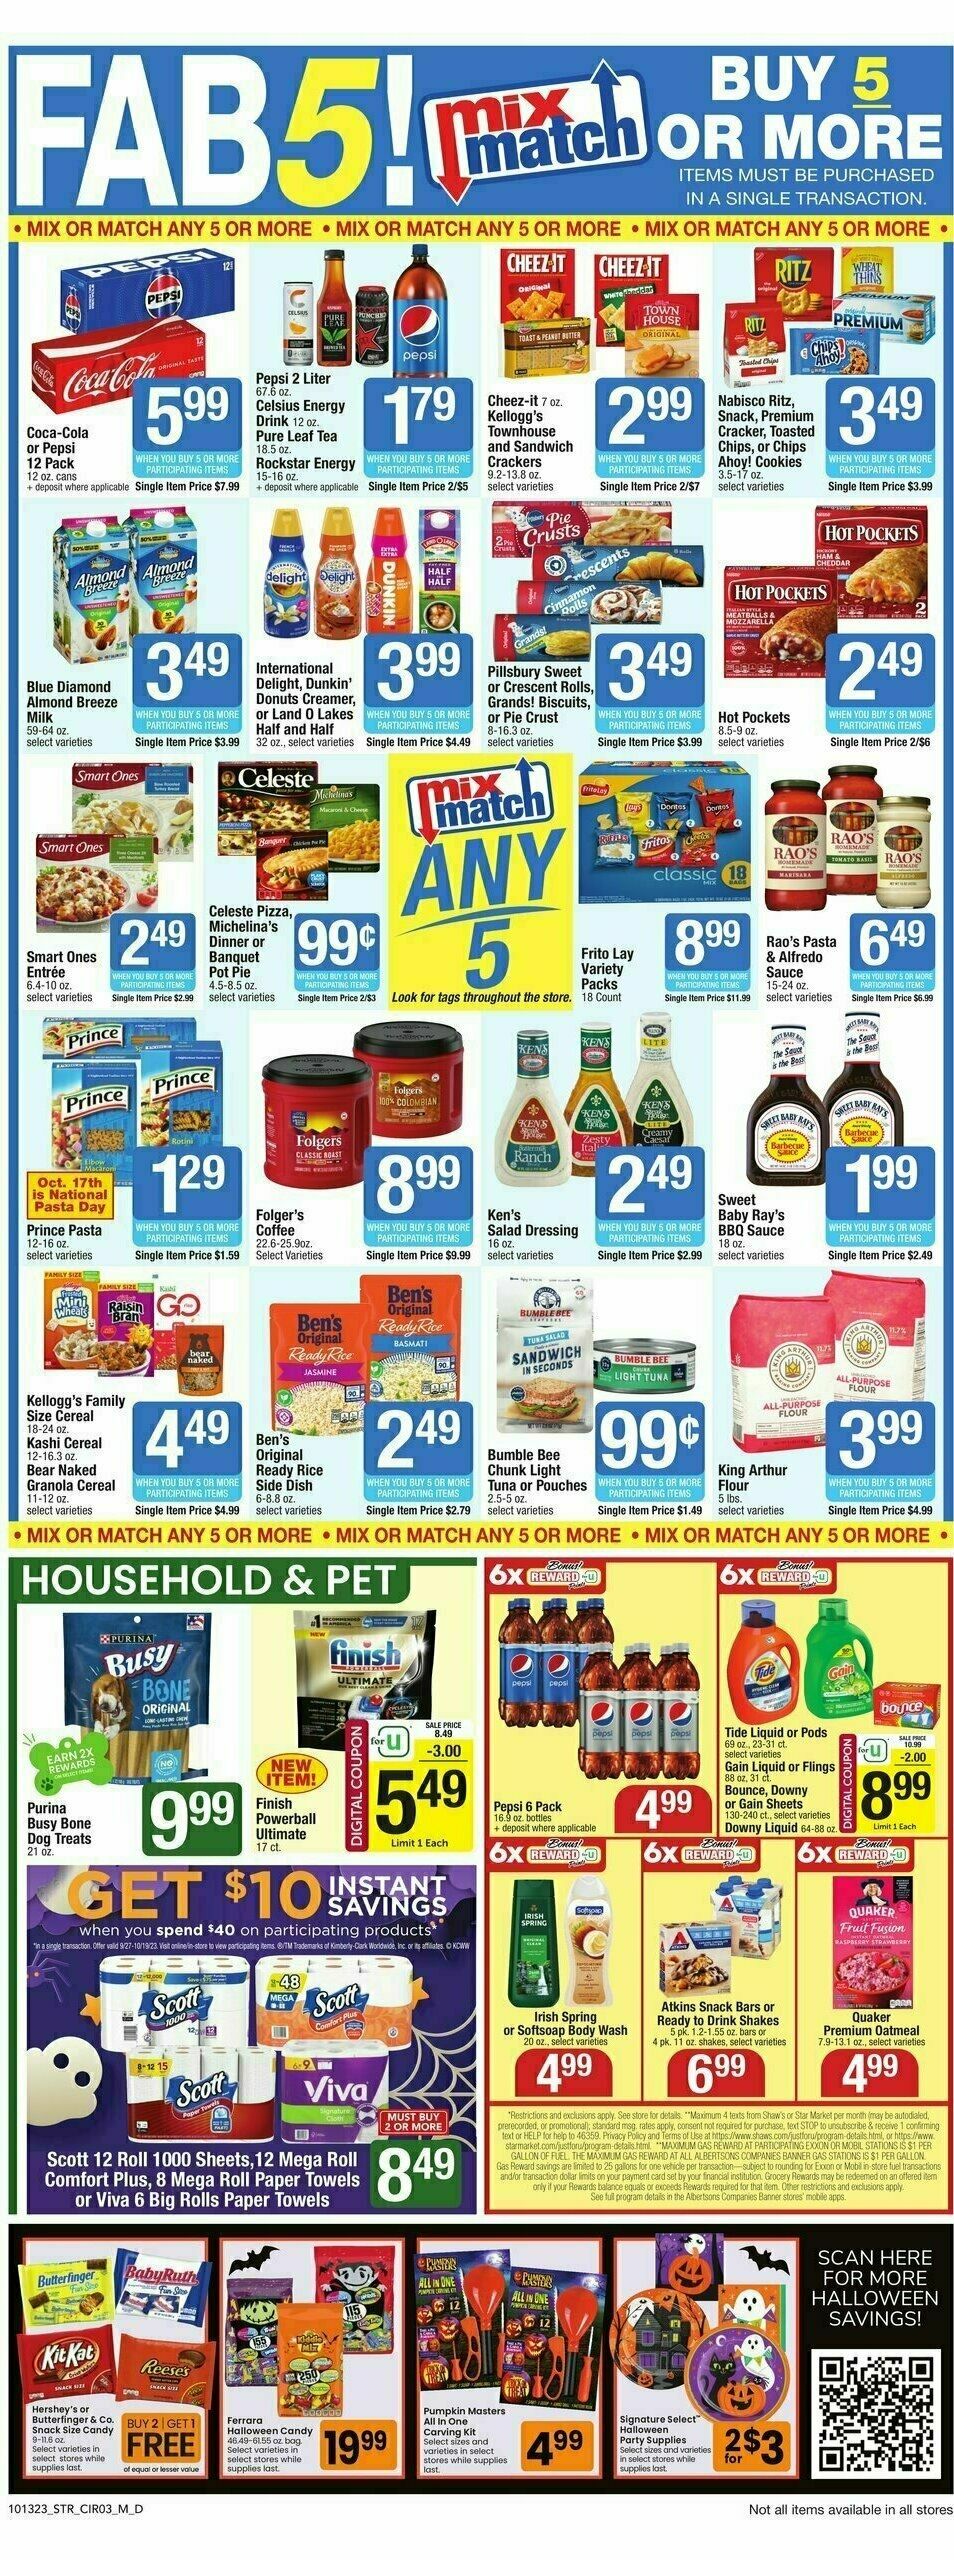 Star Market Weekly Ad from October 13